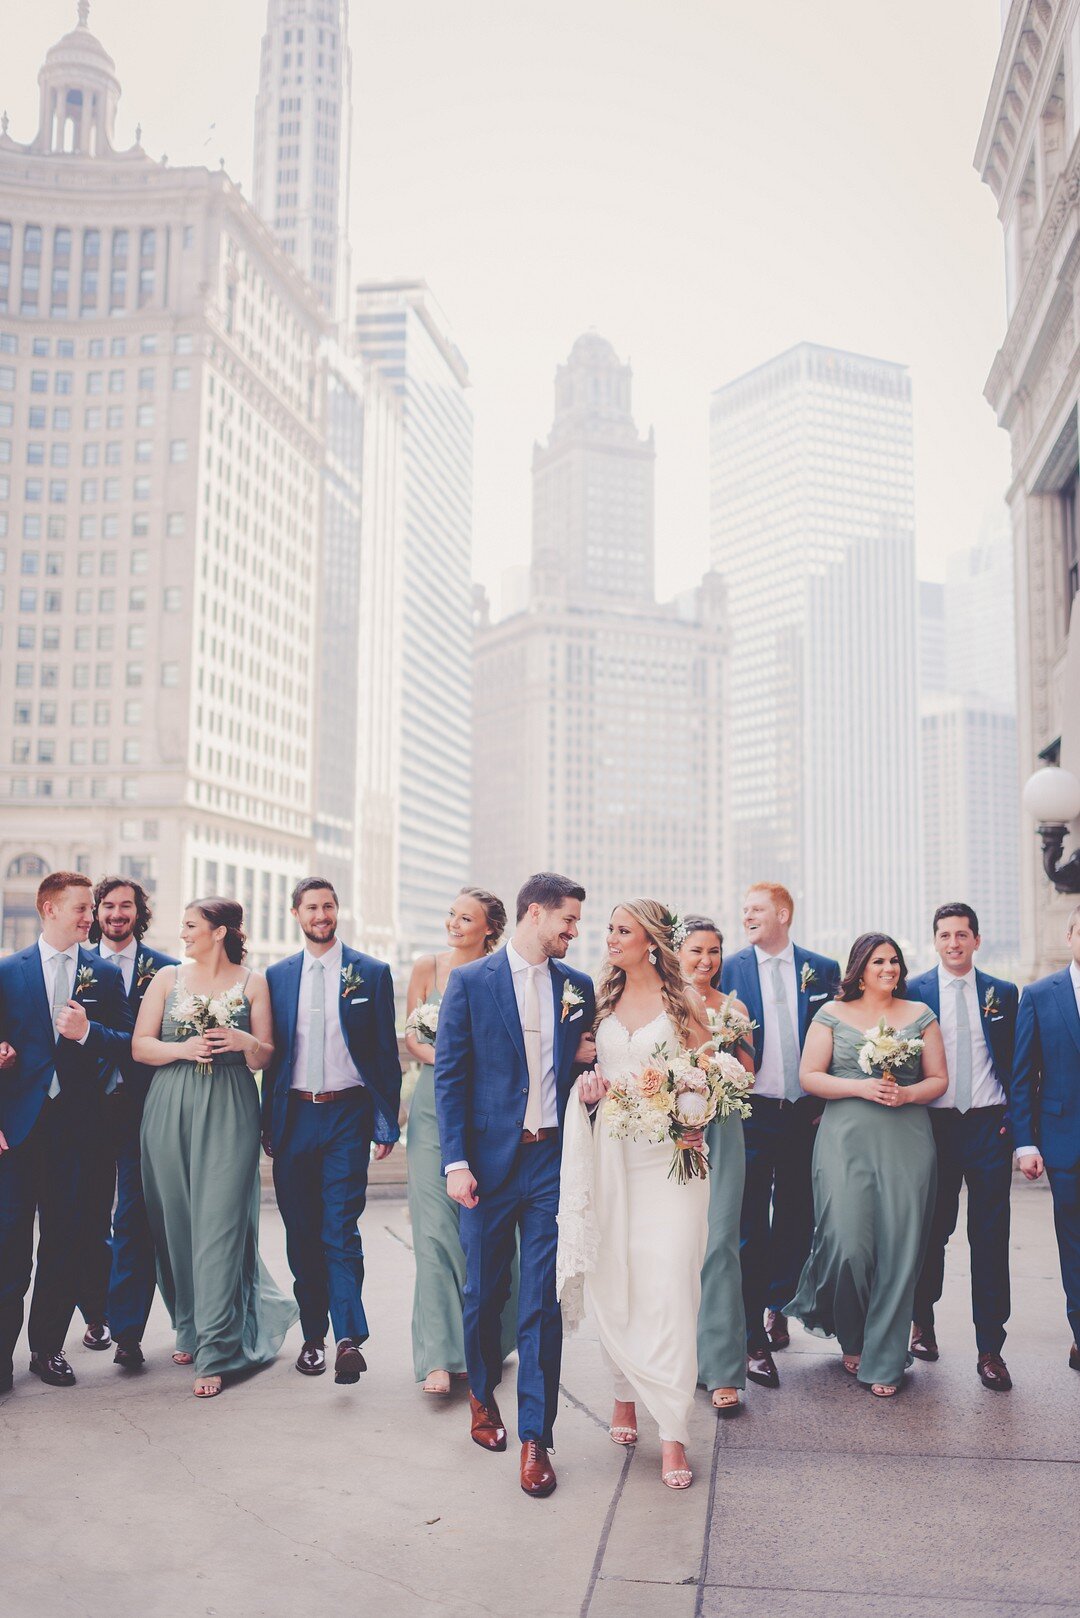 Summer Greenhouse Loft Wedding Day in Chicago captured by Kara Evans Photographer. See more summer Chicago wedding ideas on CHItheeWED.com!